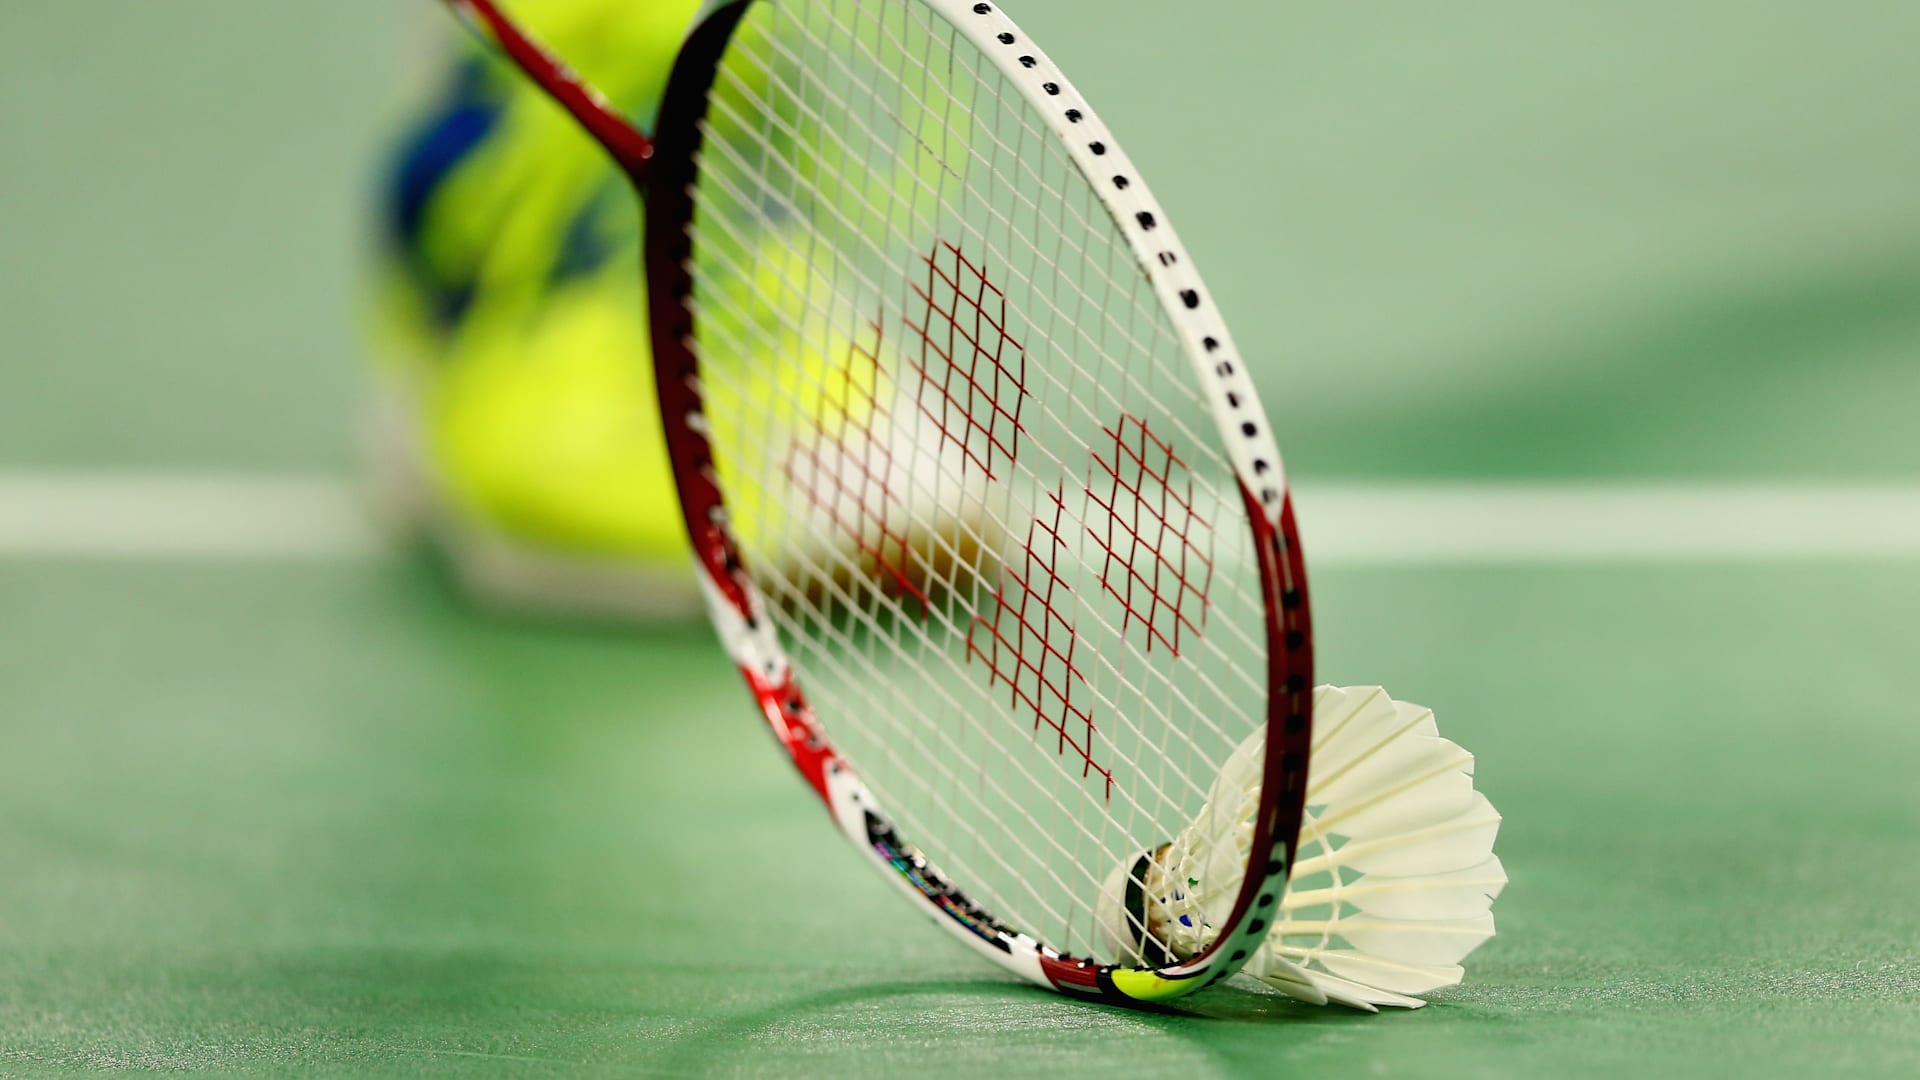 Badminton racket: Everything you need to know